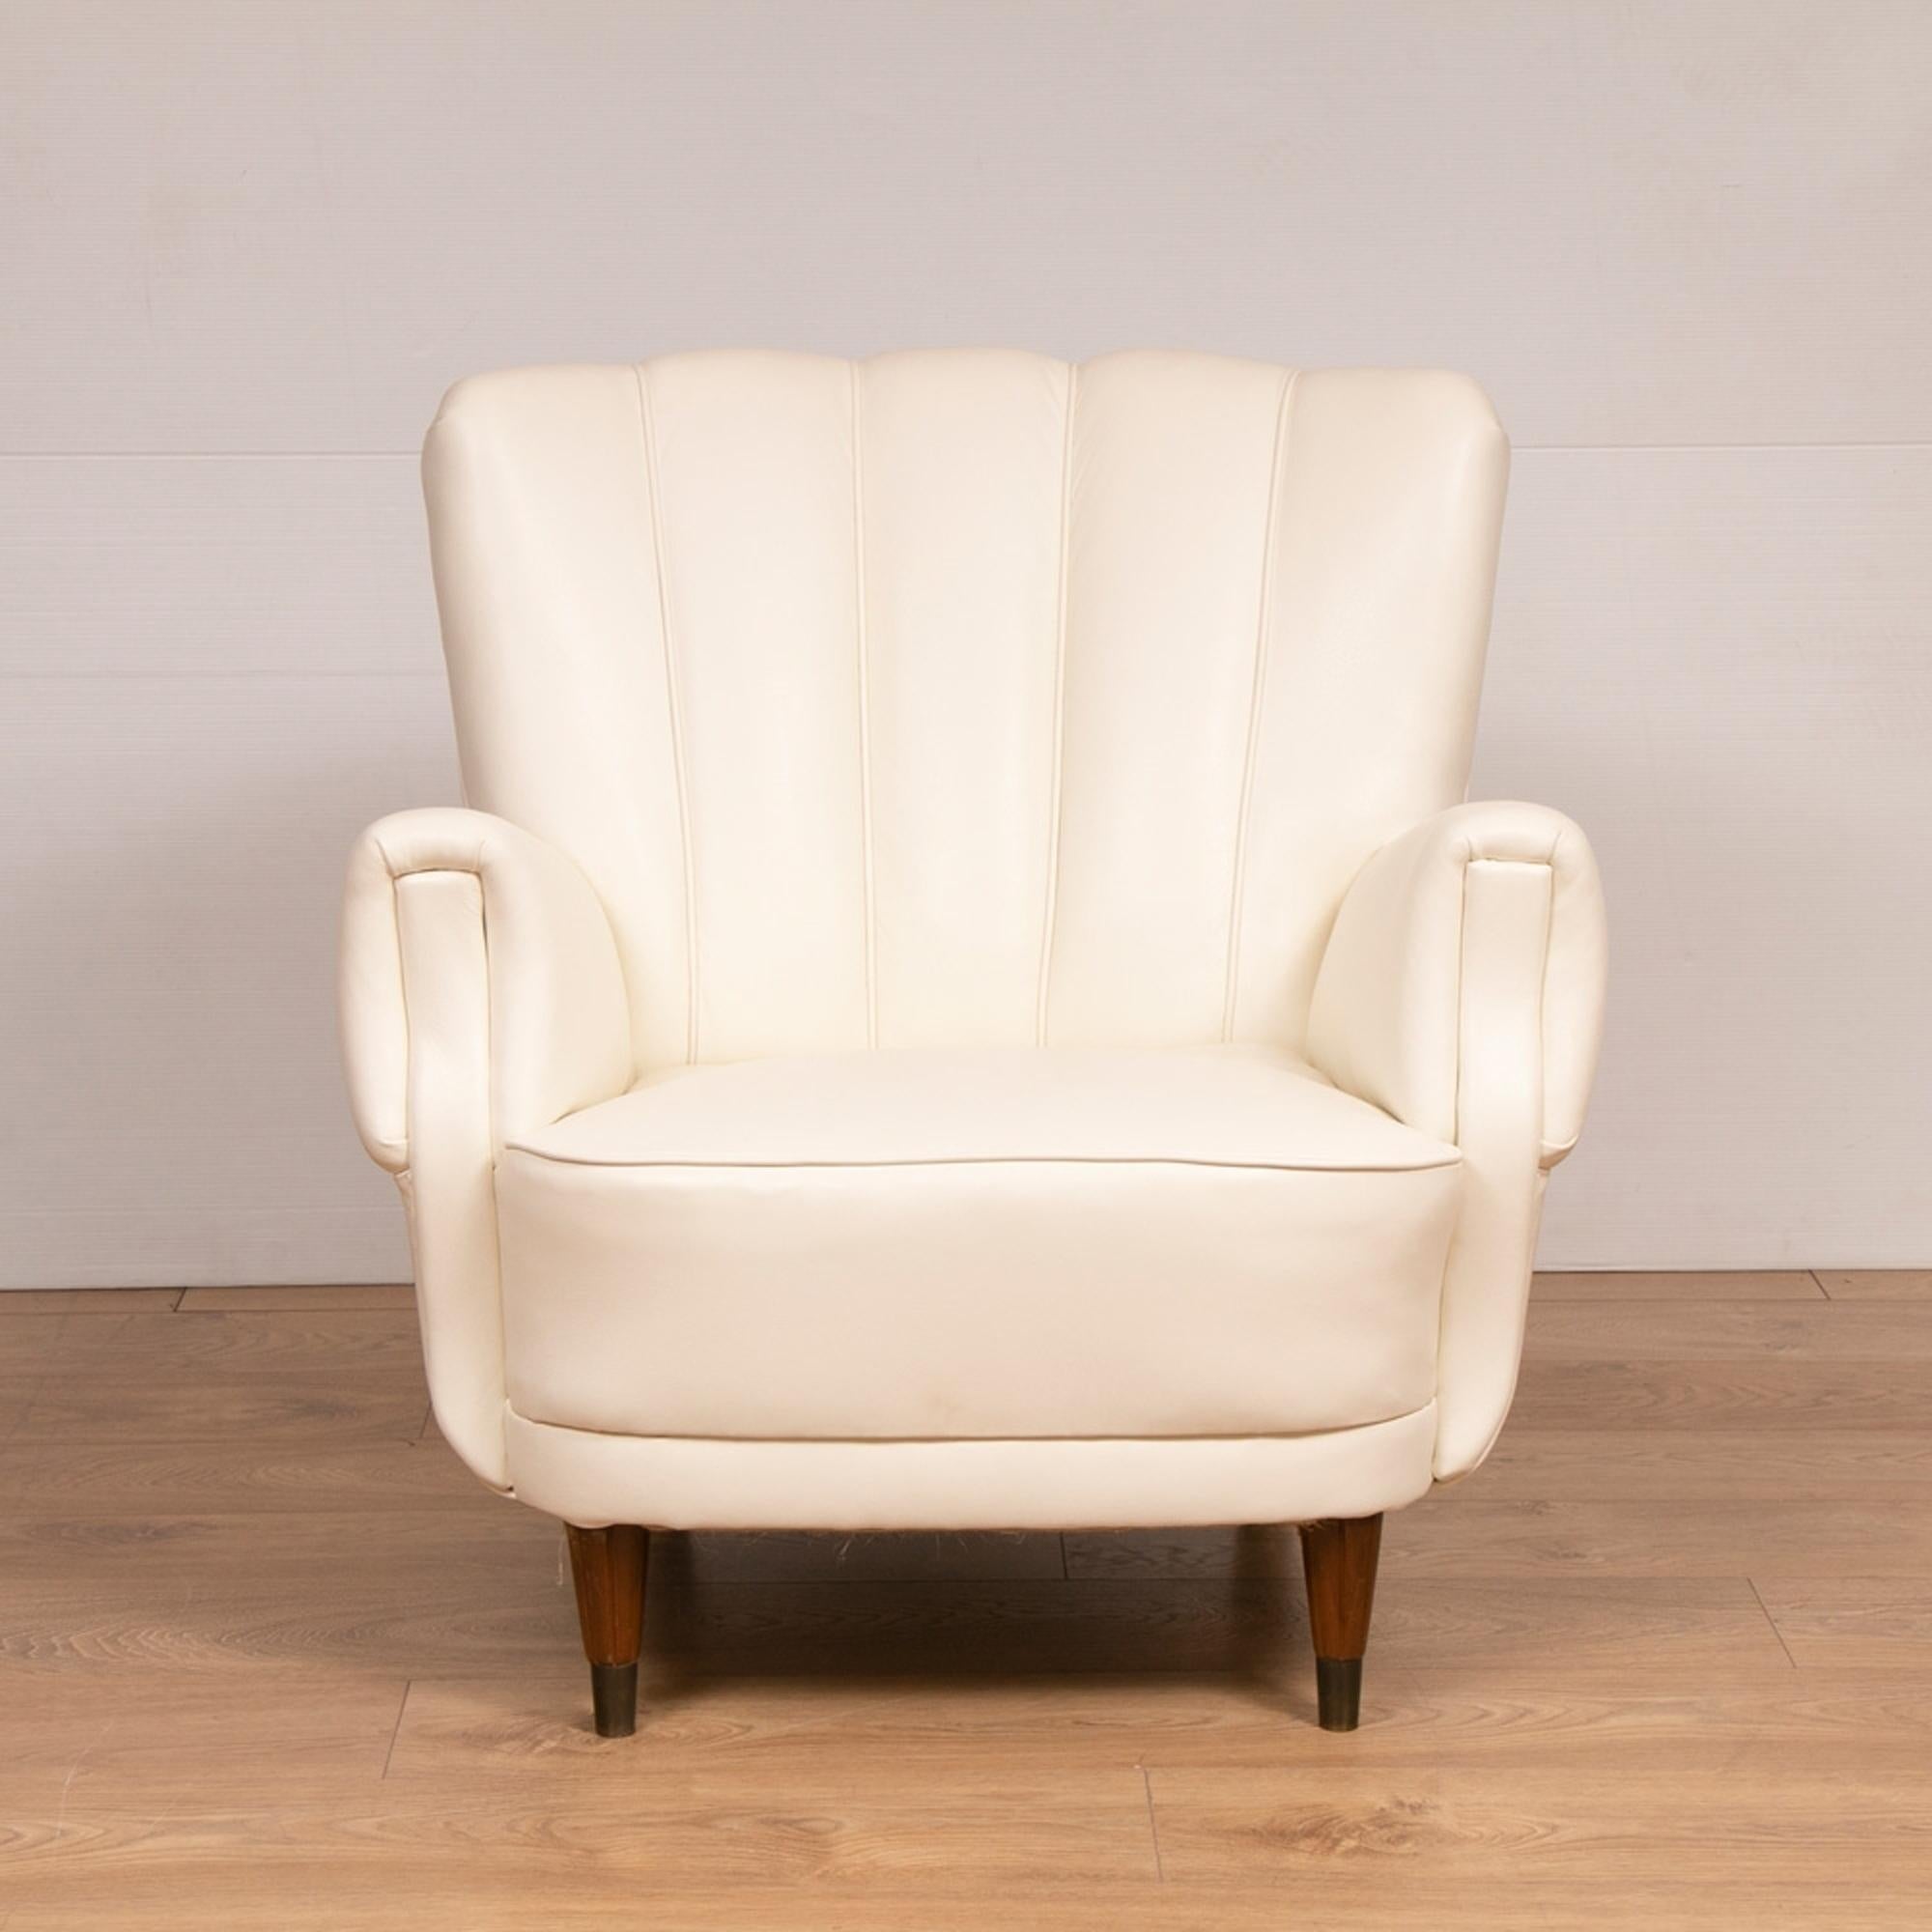 A pair of Art Deco armchairs newly upholstered in soft ivory white leather.
These are a Classic Art Deco design and we have completely reupholstered the chairs and used a traditional cow hide leather in Ivory white a finished in traditional